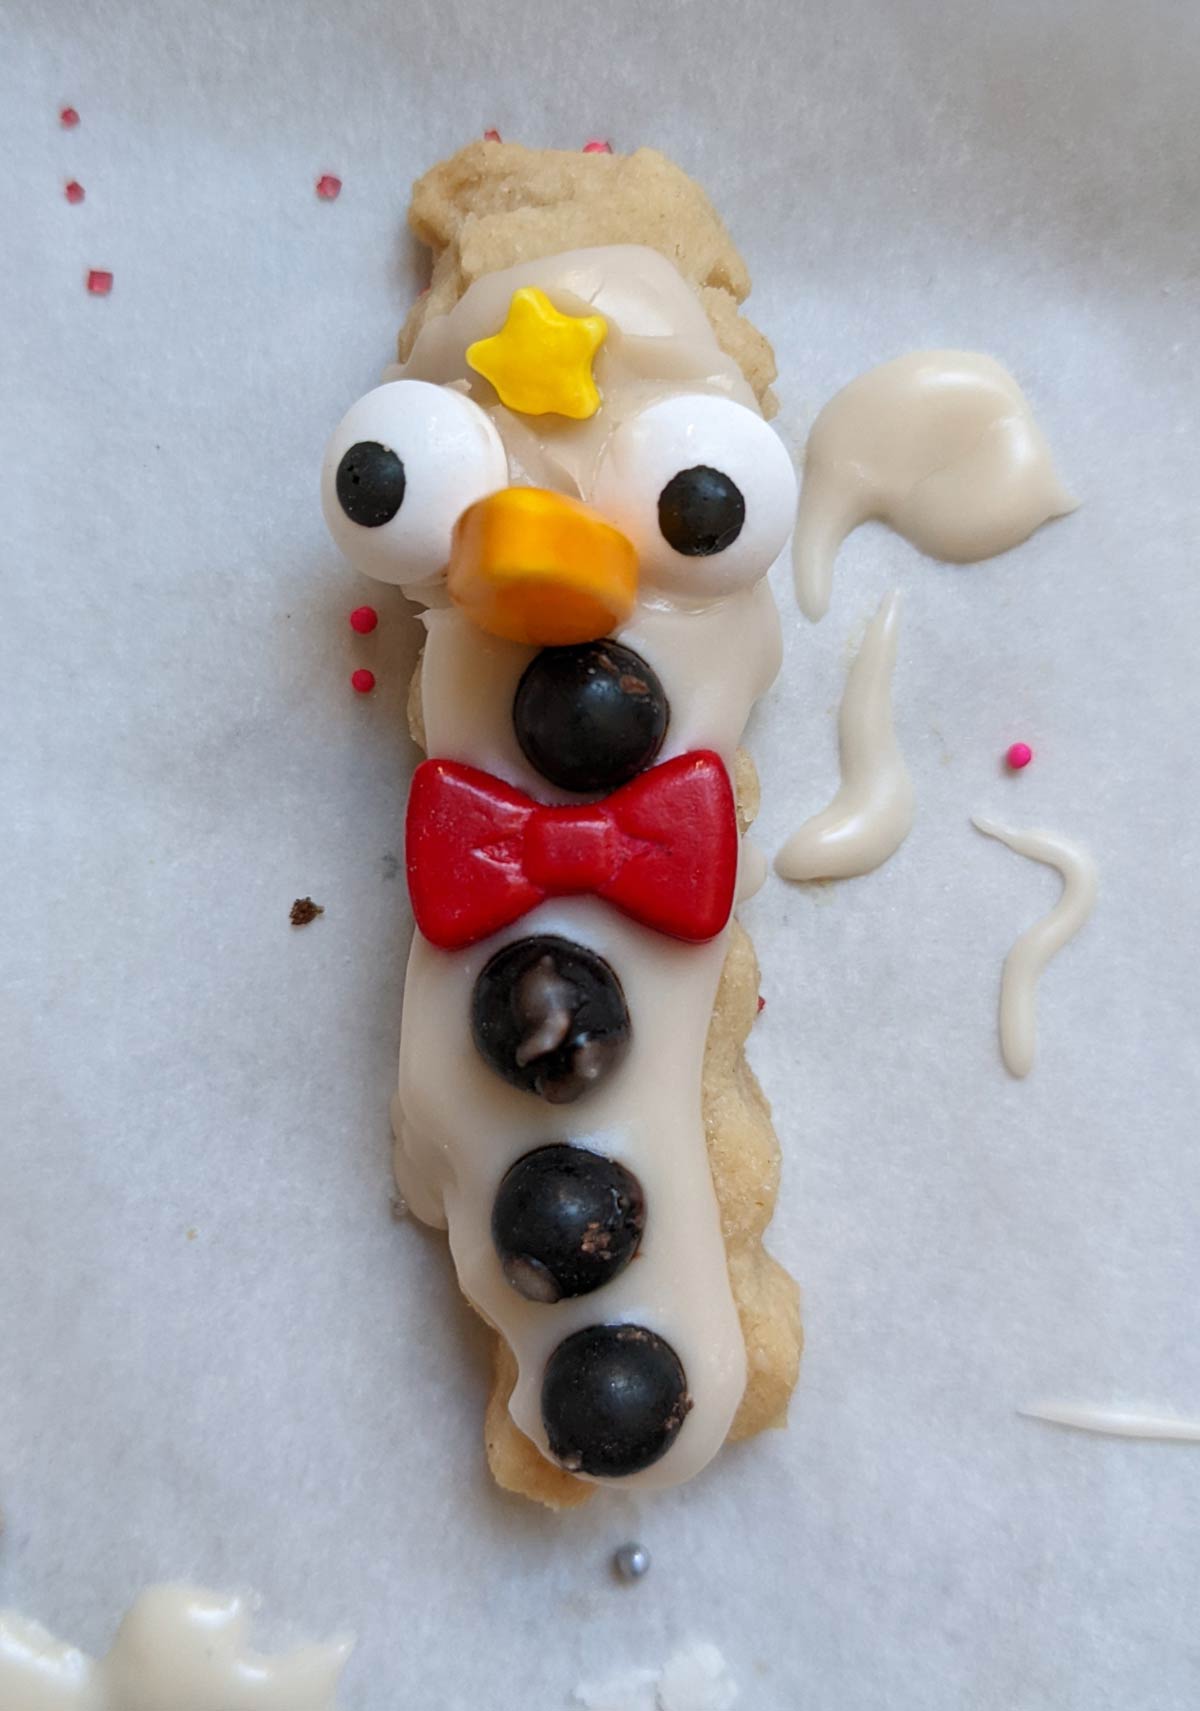 This cookie my daughter cut and decorated